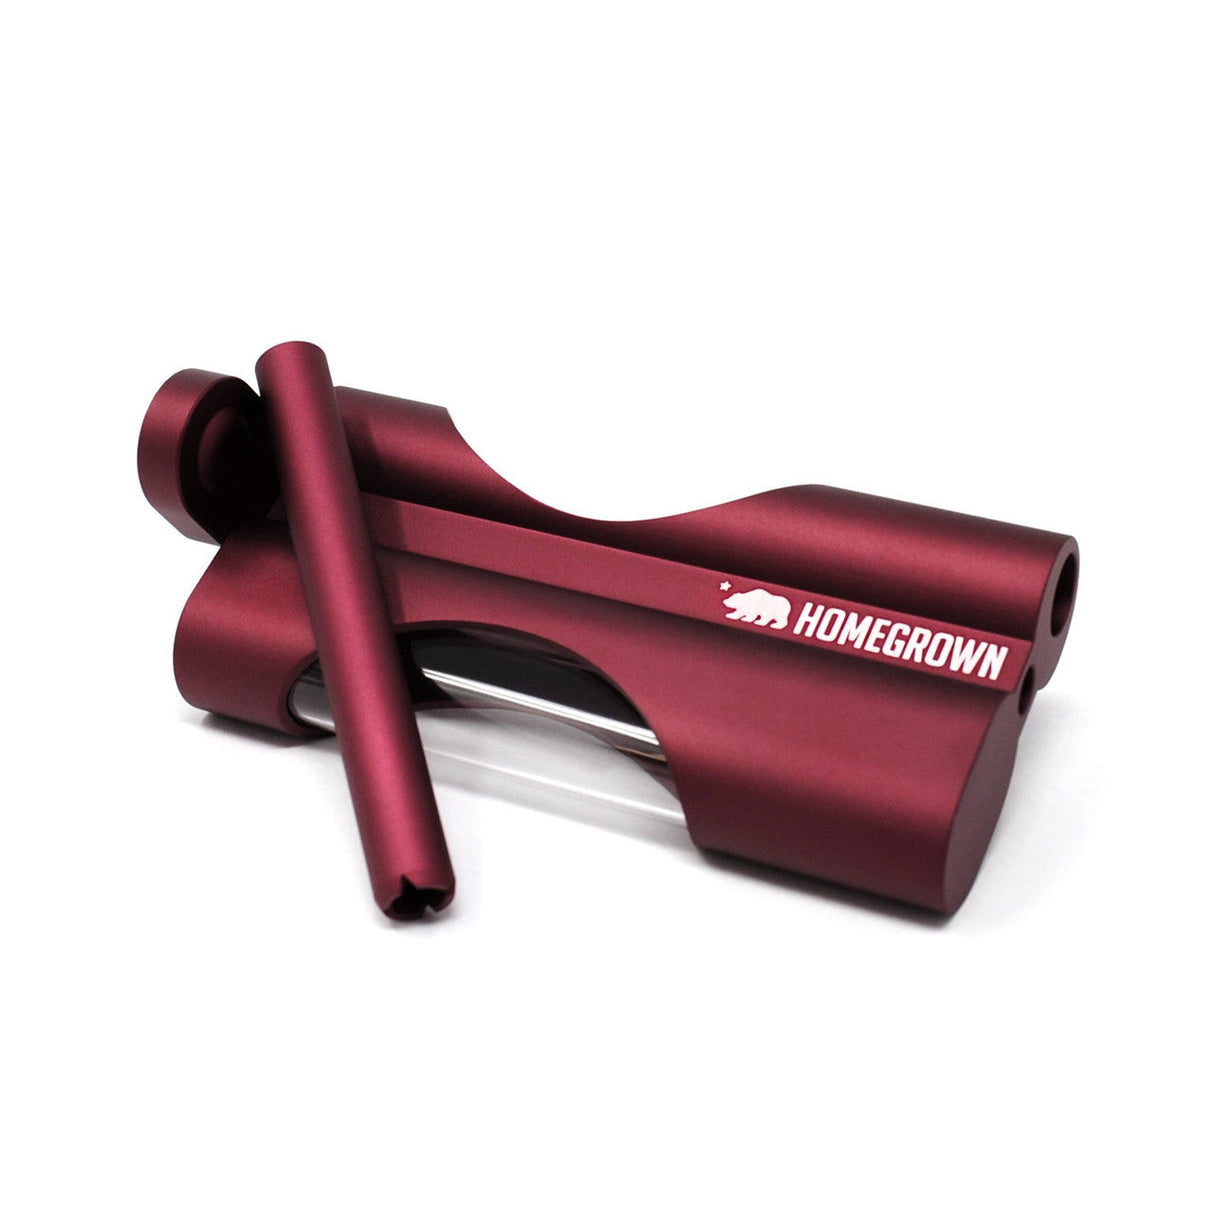 Cali Crusher Homegrown Dugout in Burgundy - Compact Aluminum Design with Bat and Poker